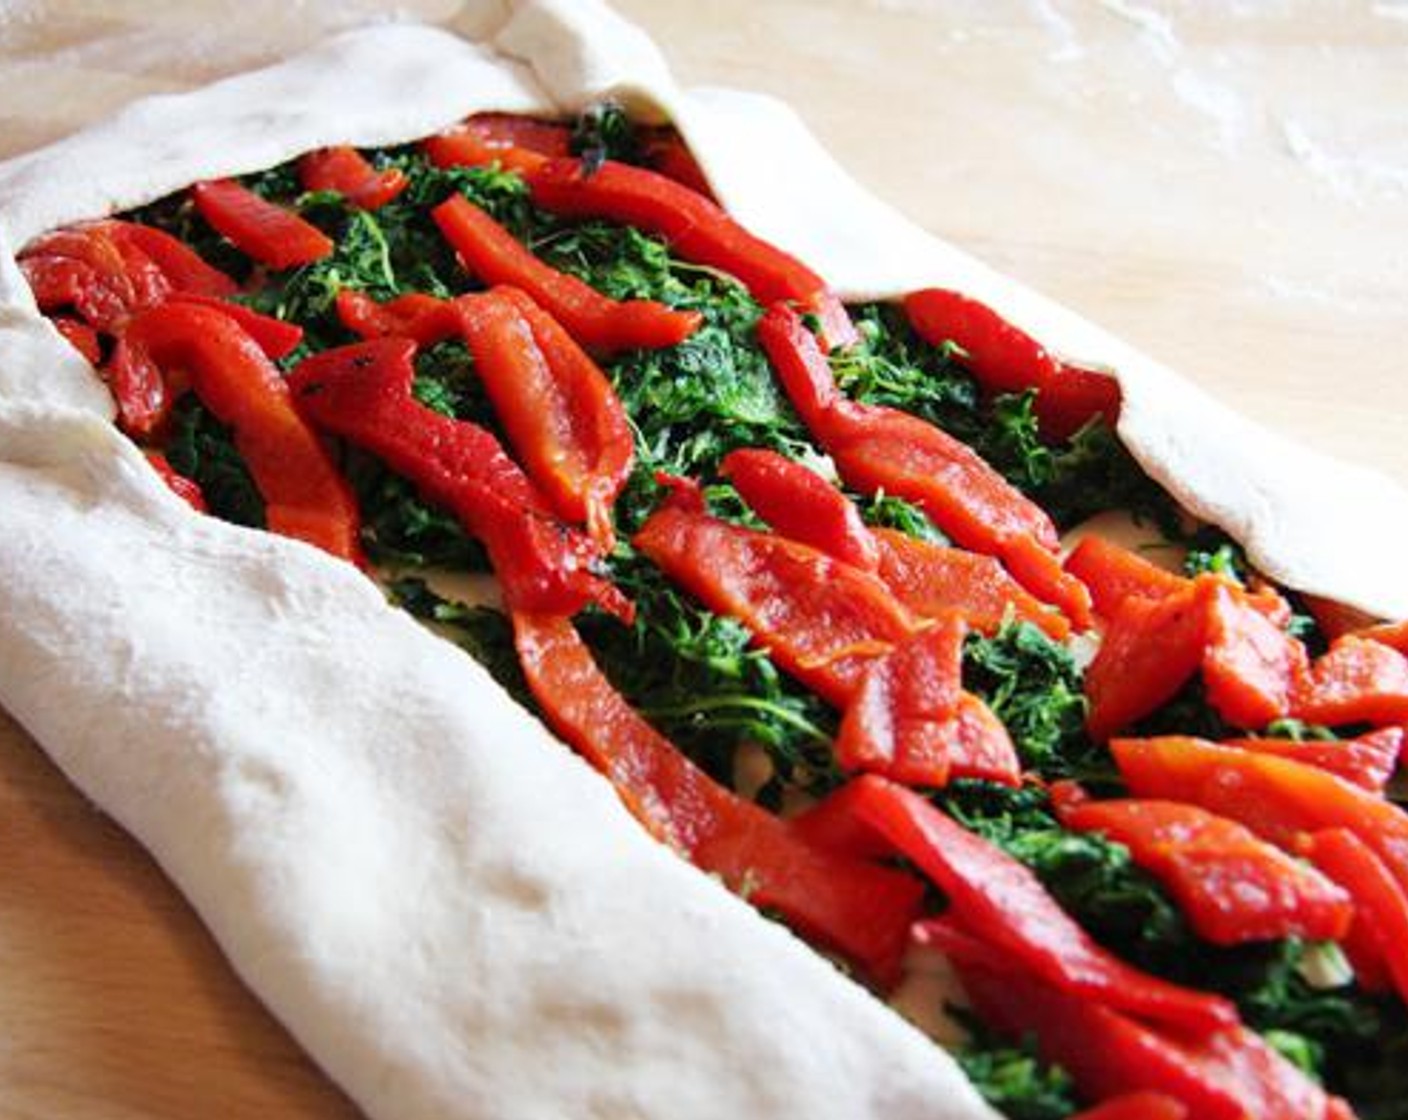 step 4 Top mixture with overlapping Provolone Cheese (12 slices). Add the Frozen Spinach (2 cups) in an even layer. Finally, add the Roasted Red Pepper Strips (2 cups) in a single layer, long sides parallel to the long sides of the dough rectangle.